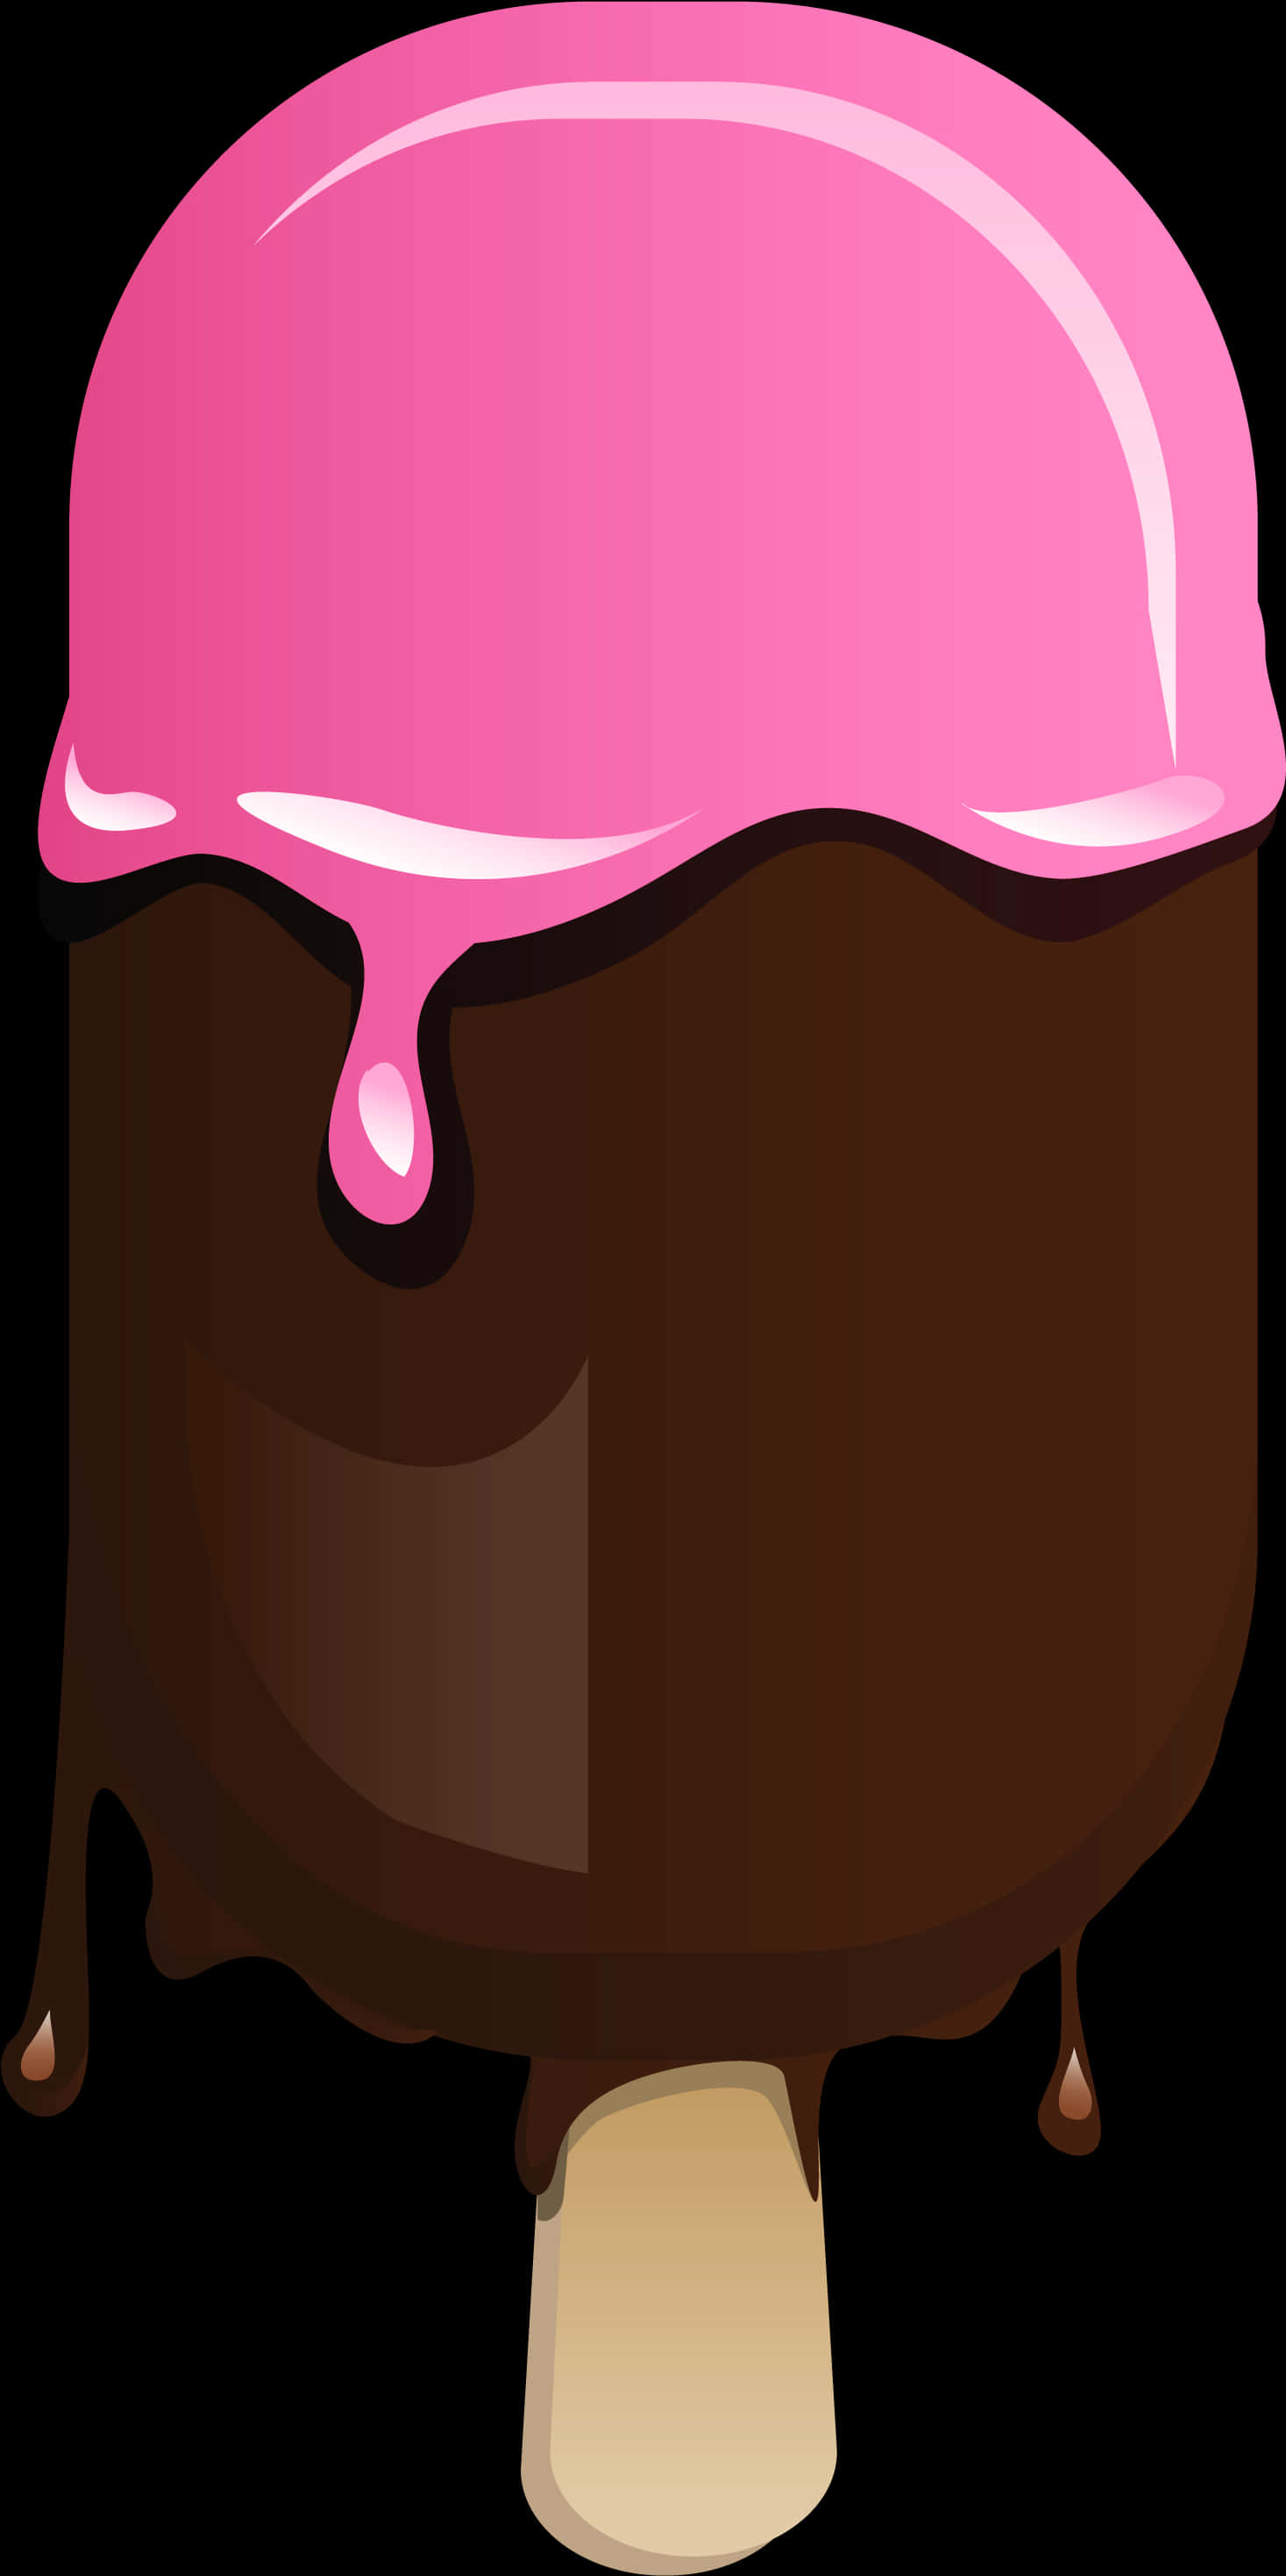 Chocolate Ice Cream Barwith Pink Topping Clipart PNG